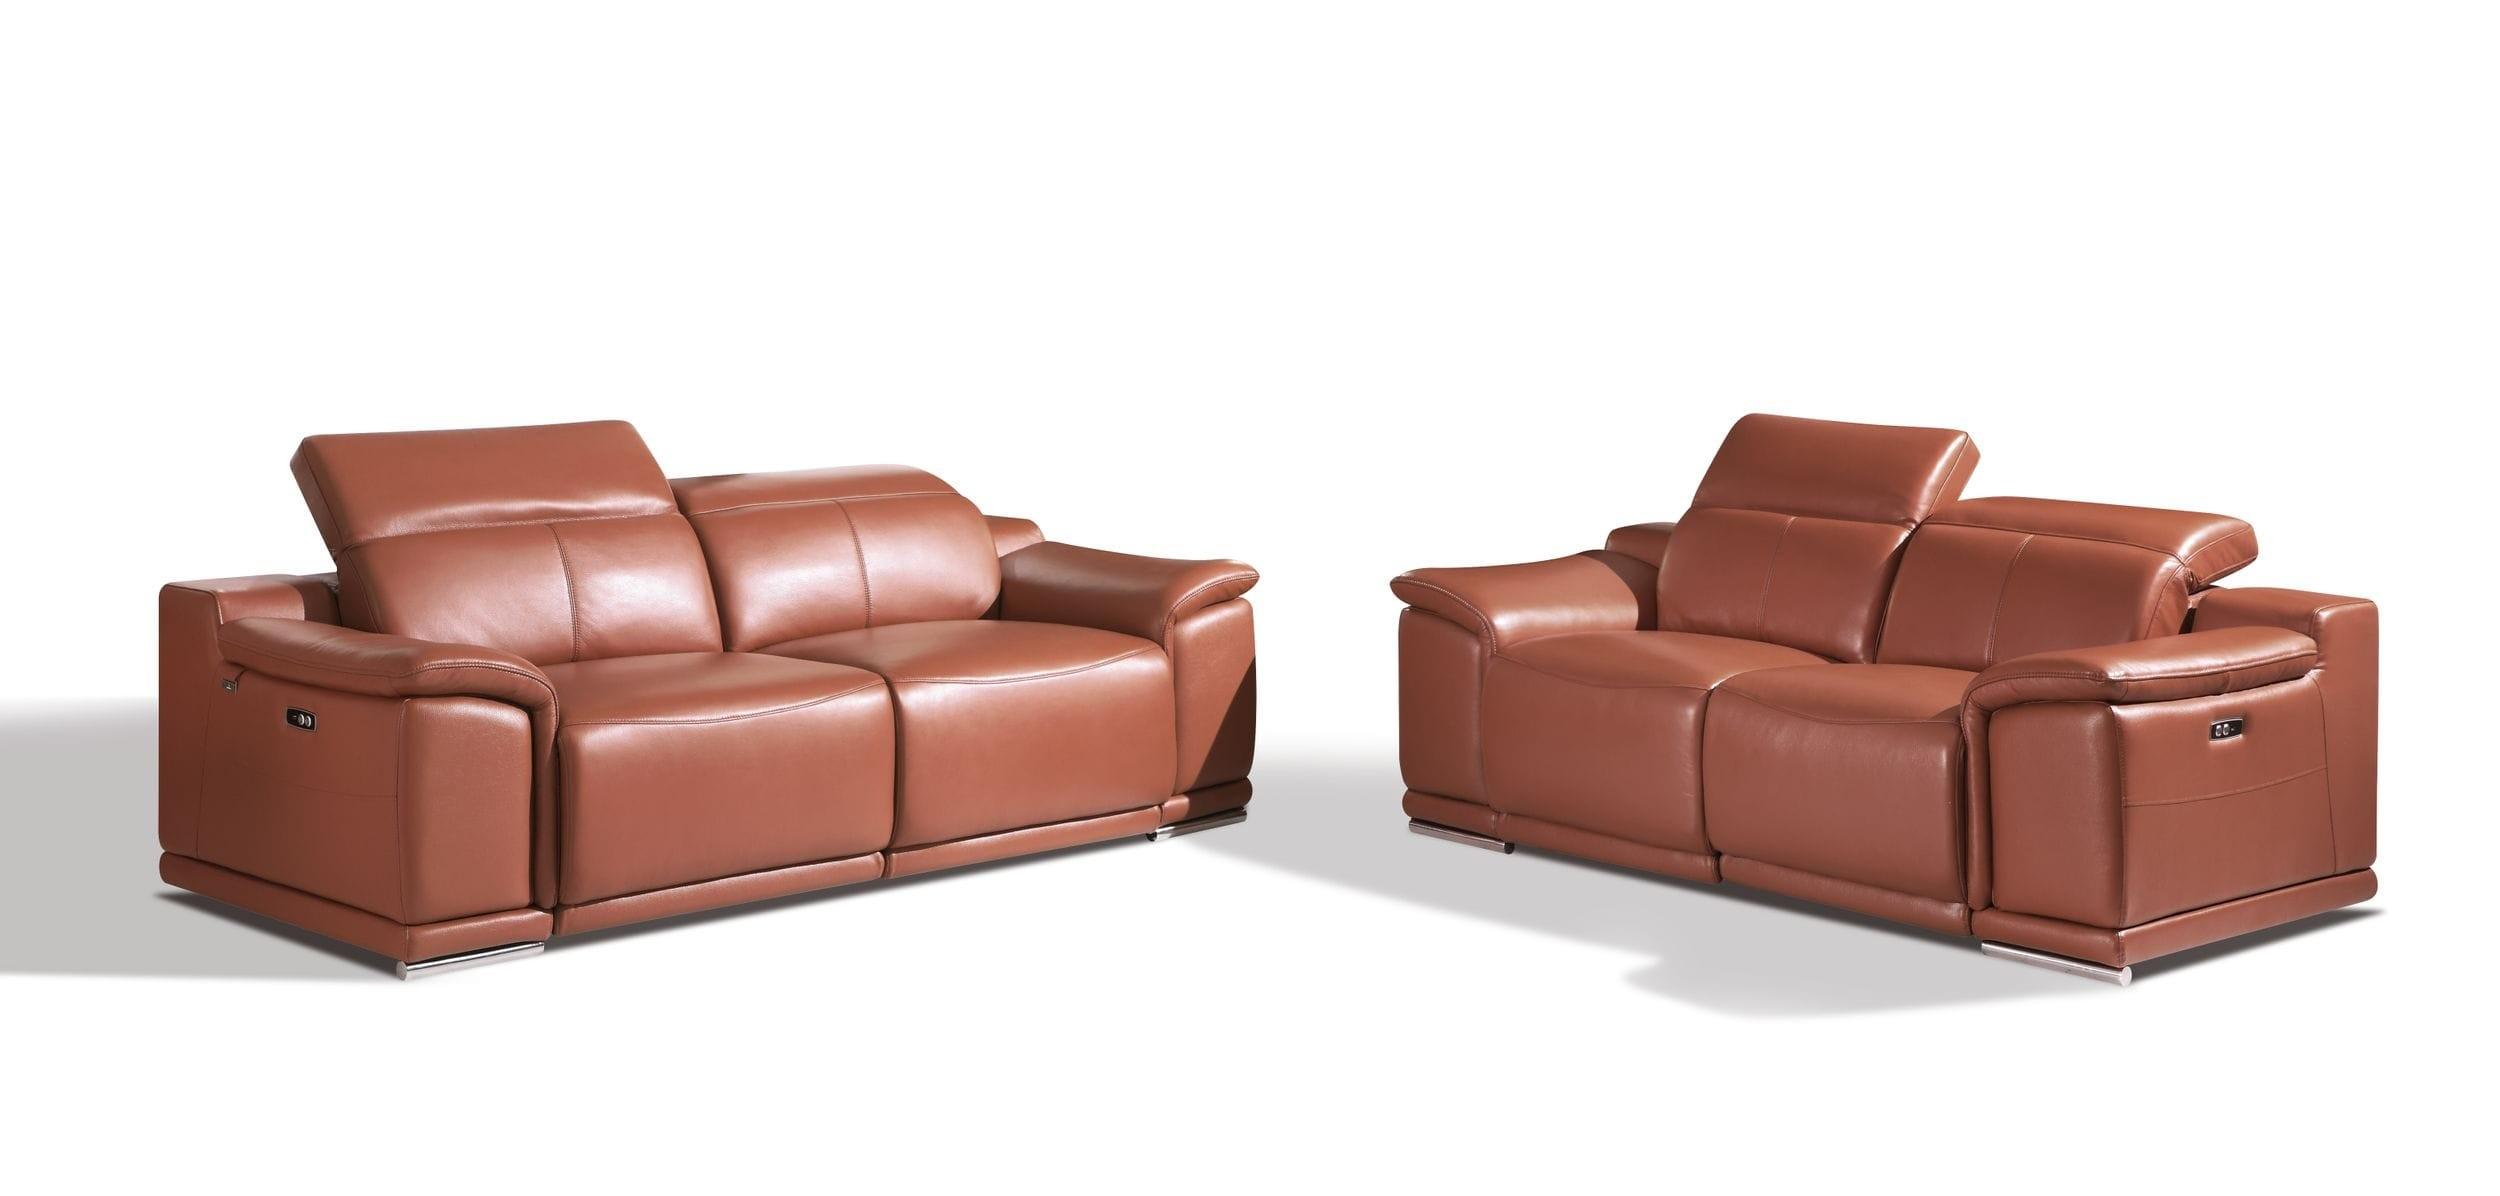 Contemporary Reclining Set 9762 9762-CAMEL-2PC in Camel Leather Match